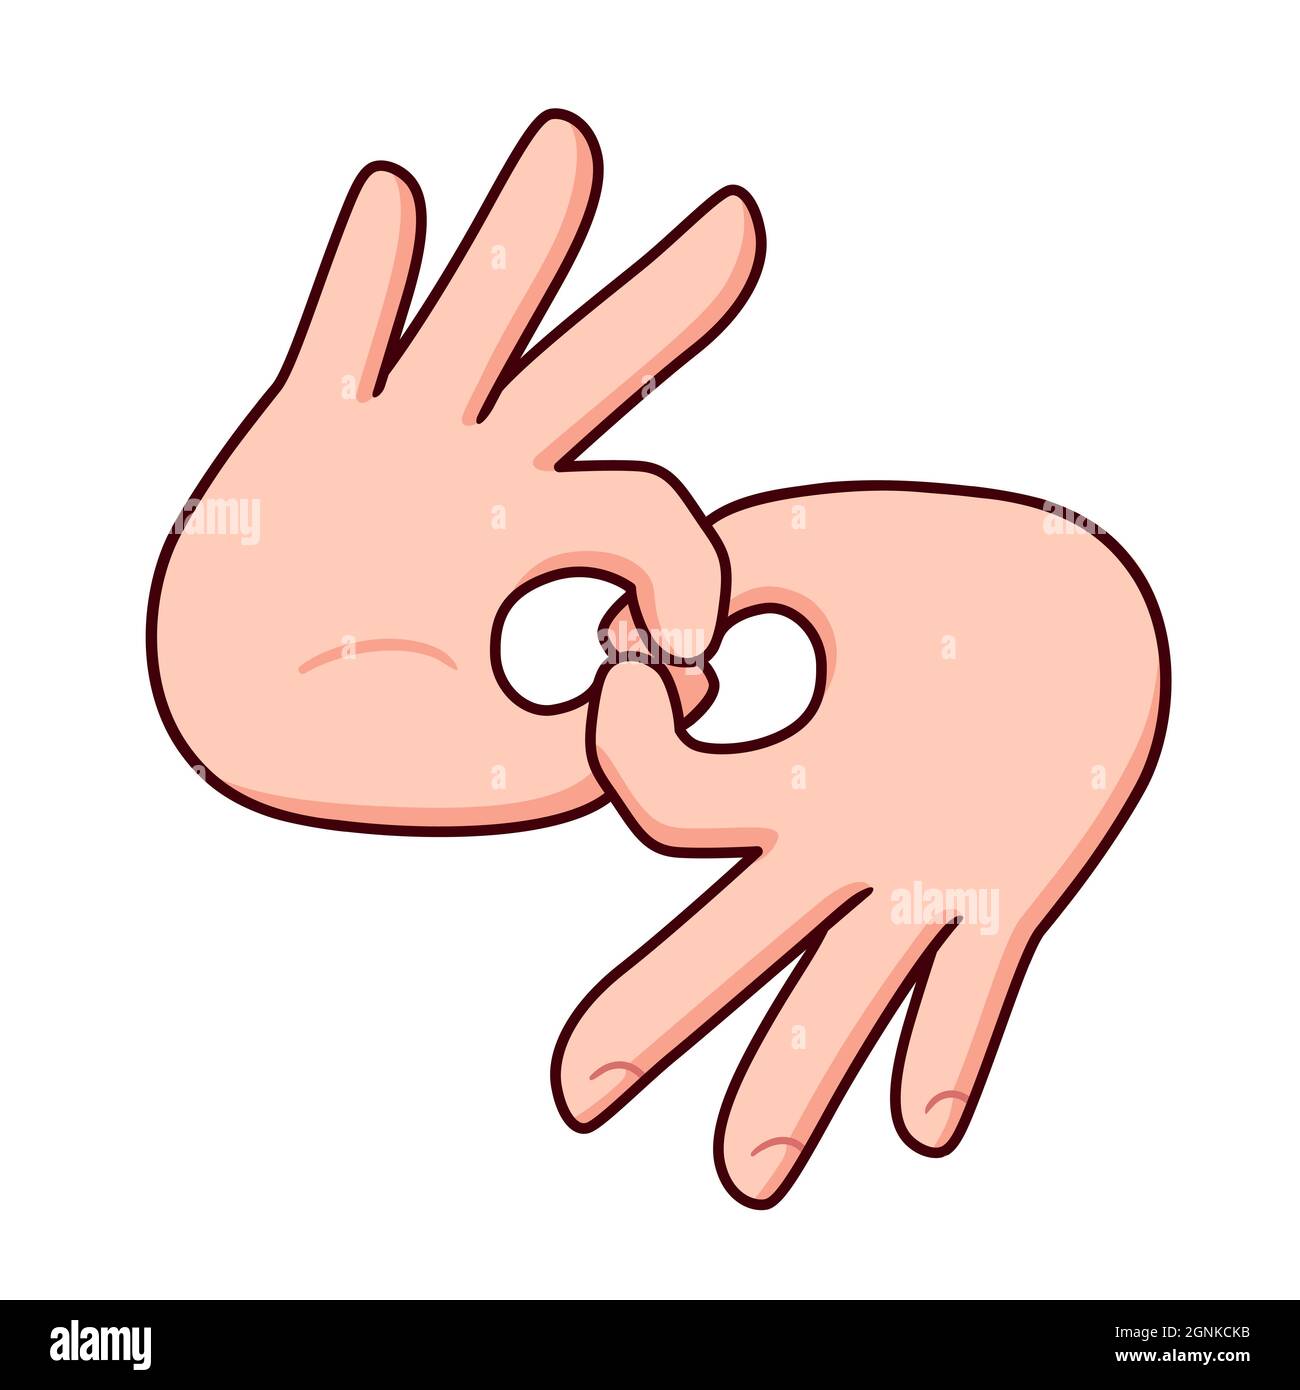 Sign language deaf Cut Out Stock Images & Pictures - Alamy